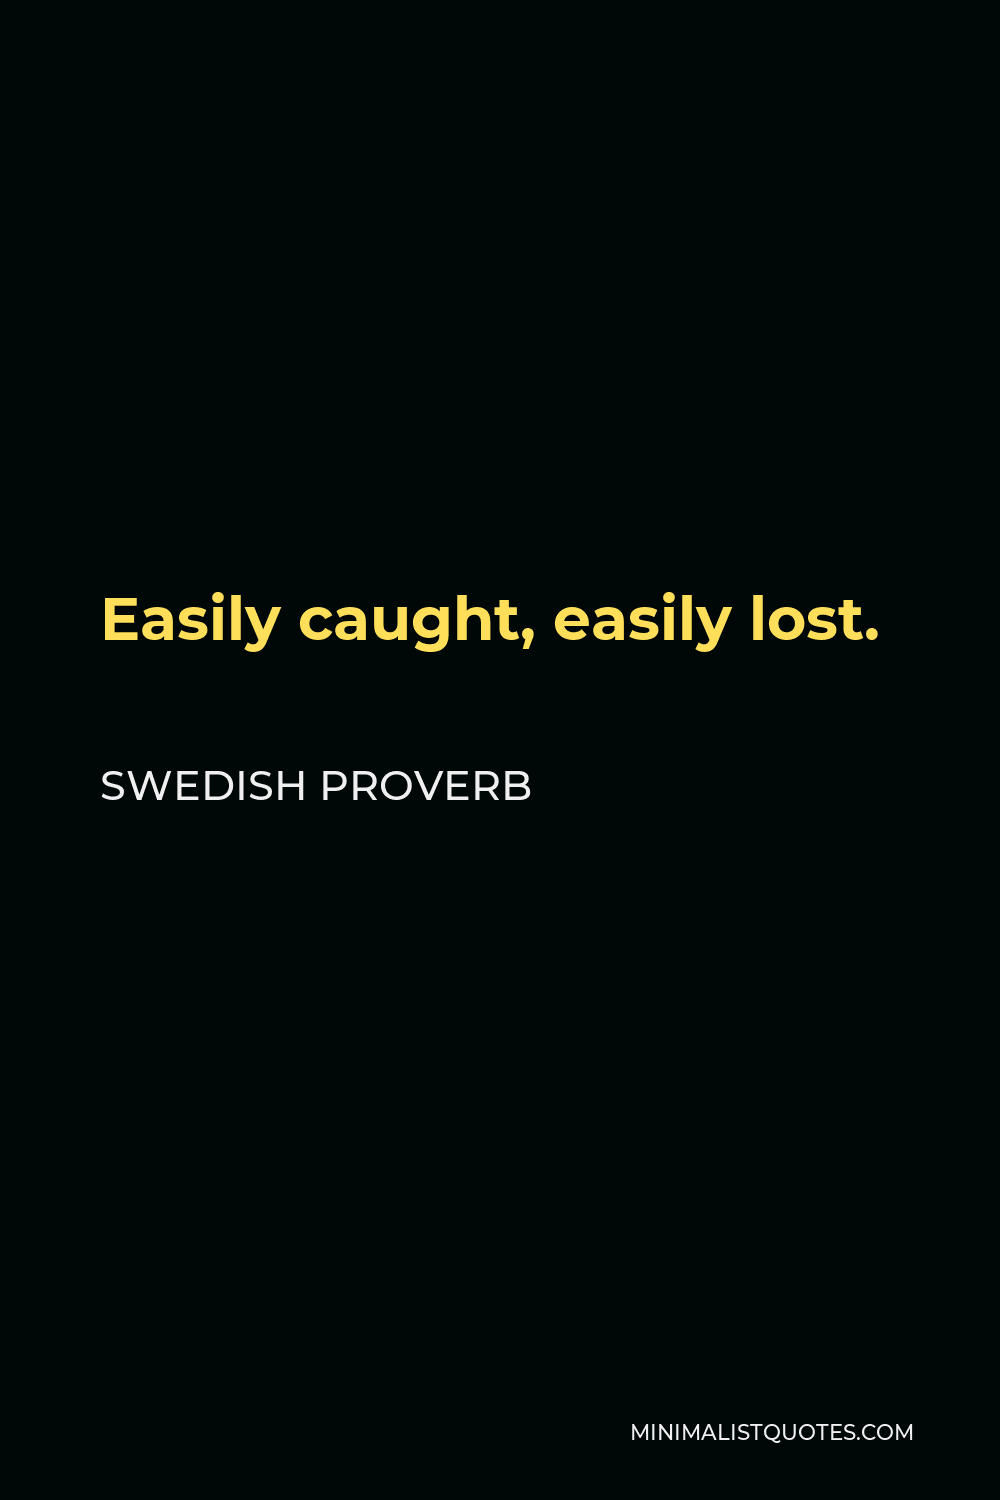 Swedish Proverb Quote - Easily caught, easily lost.